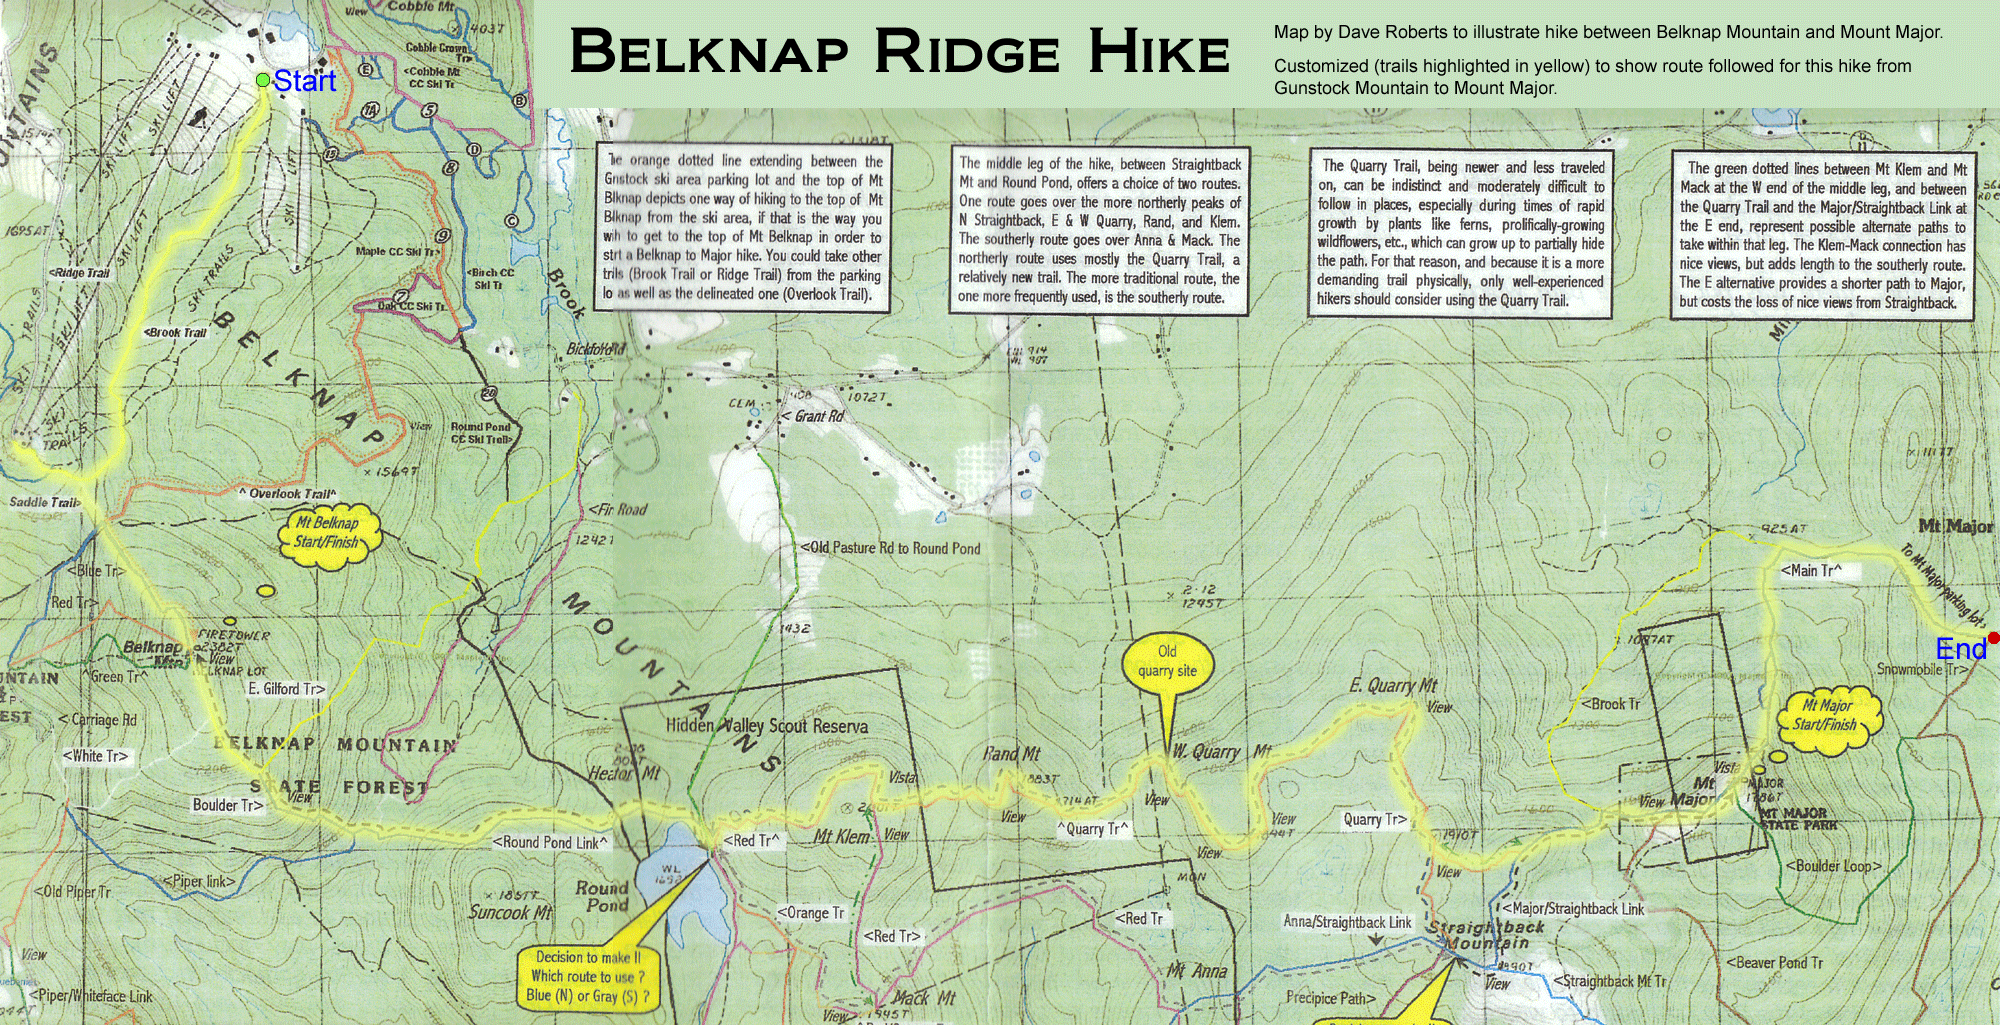 Trail map of hike route on Belknap Ridge from Gunstock Mountain to Mount Major (map by Dave Roberts)